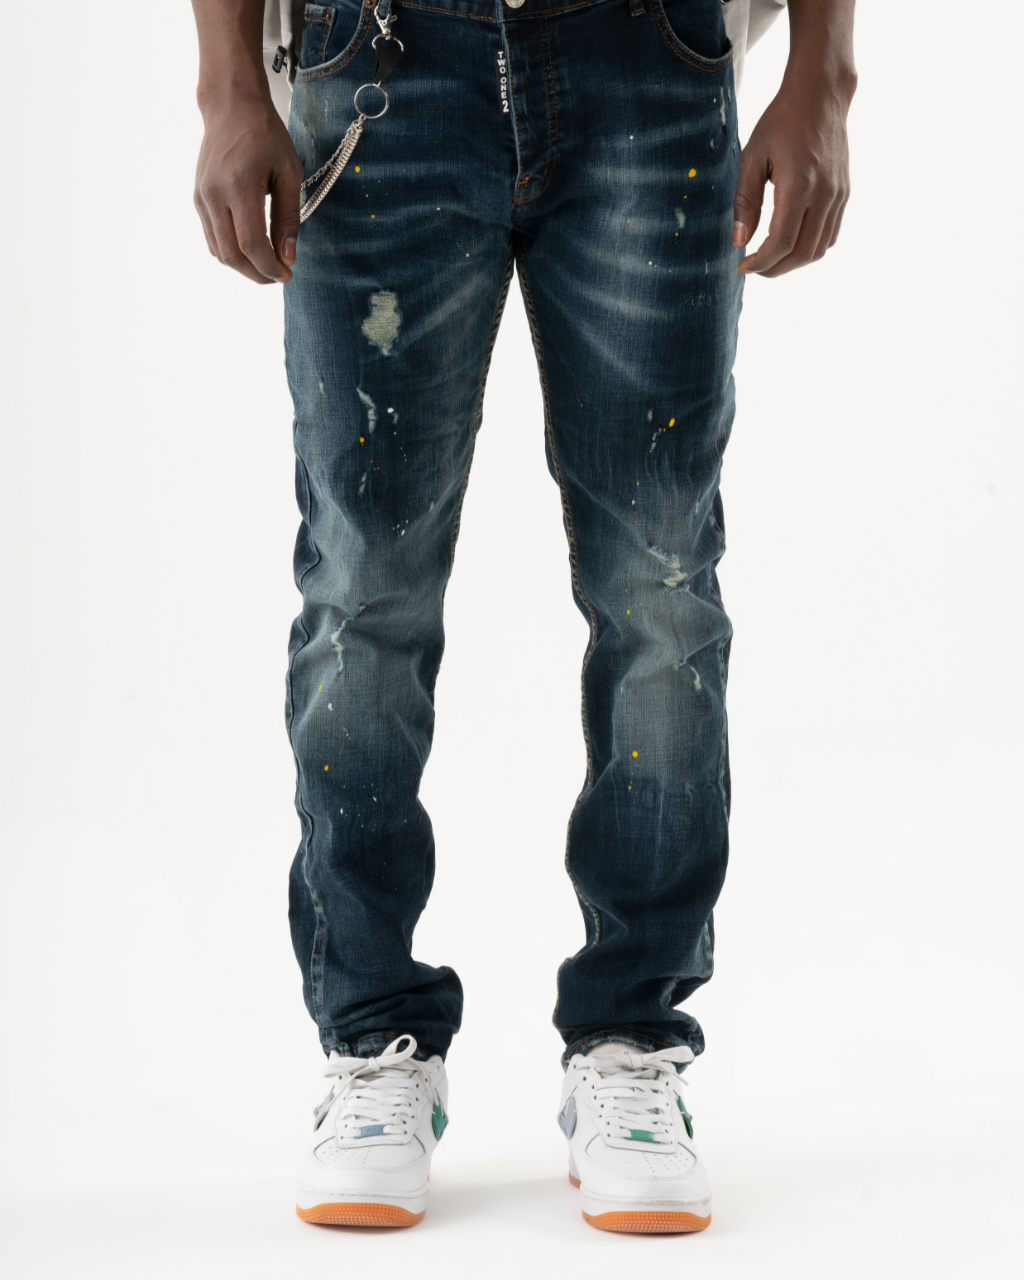 A man wearing a pair of KUDOS jeans and sneakers.